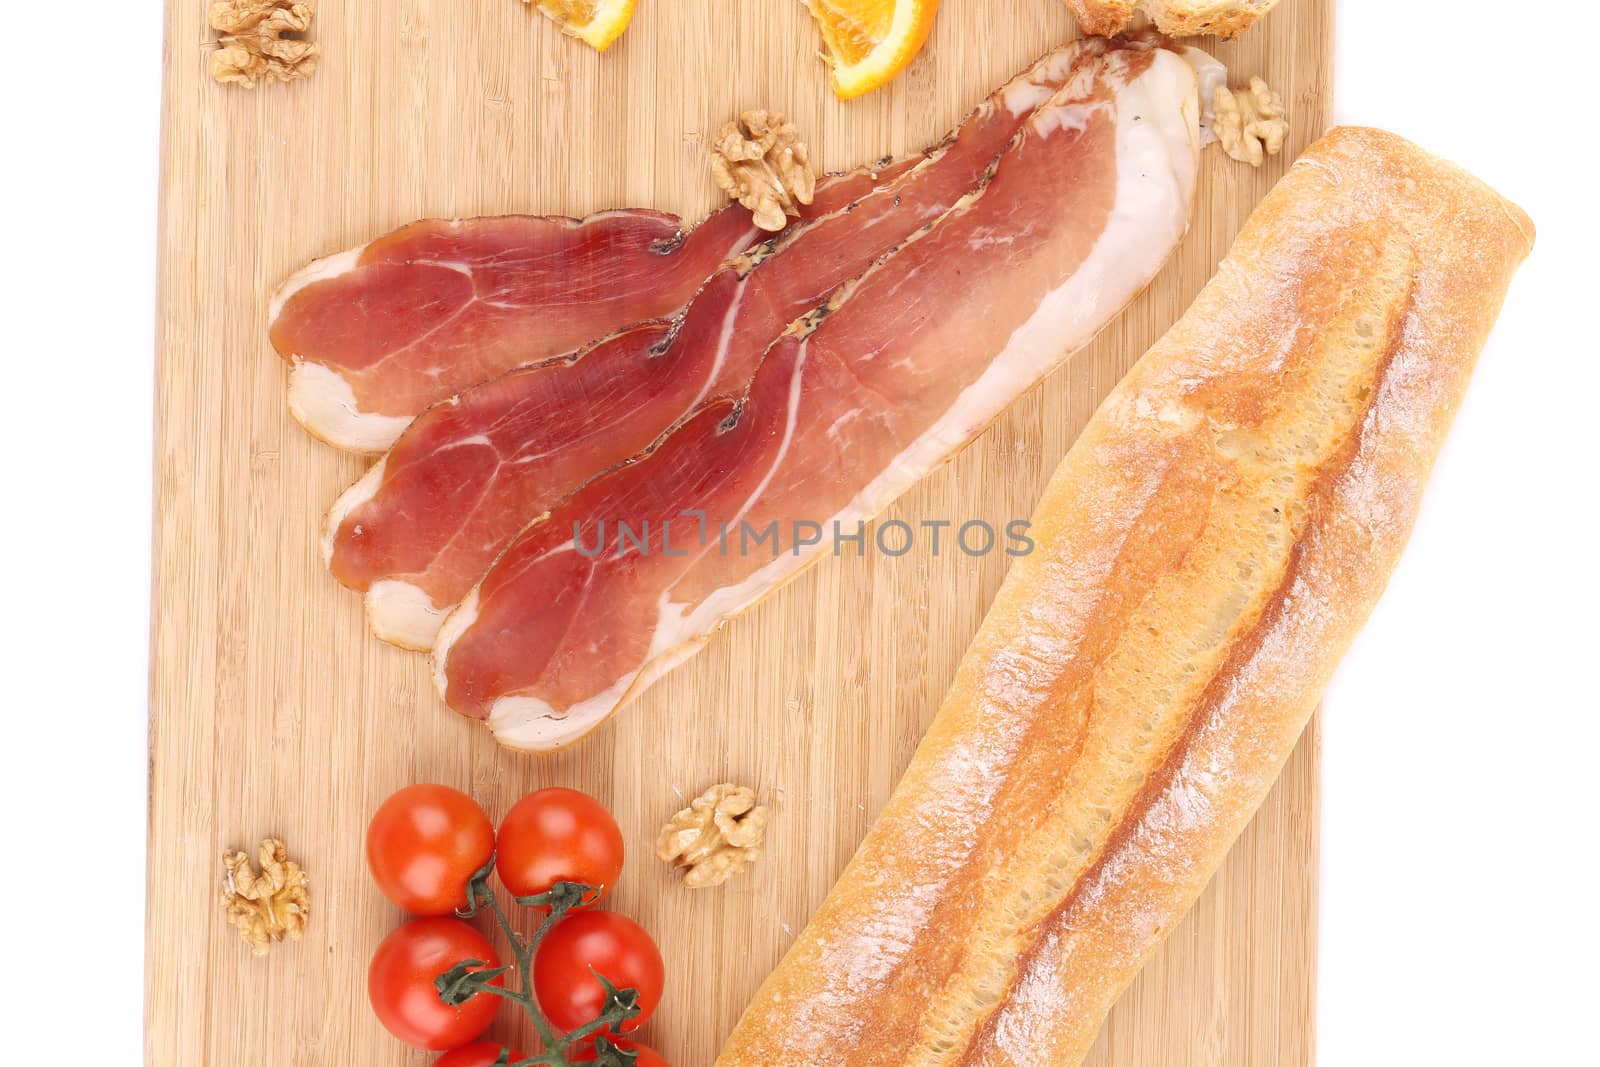 Prosciutto with cherry tomatoes and walnuts. by indigolotos